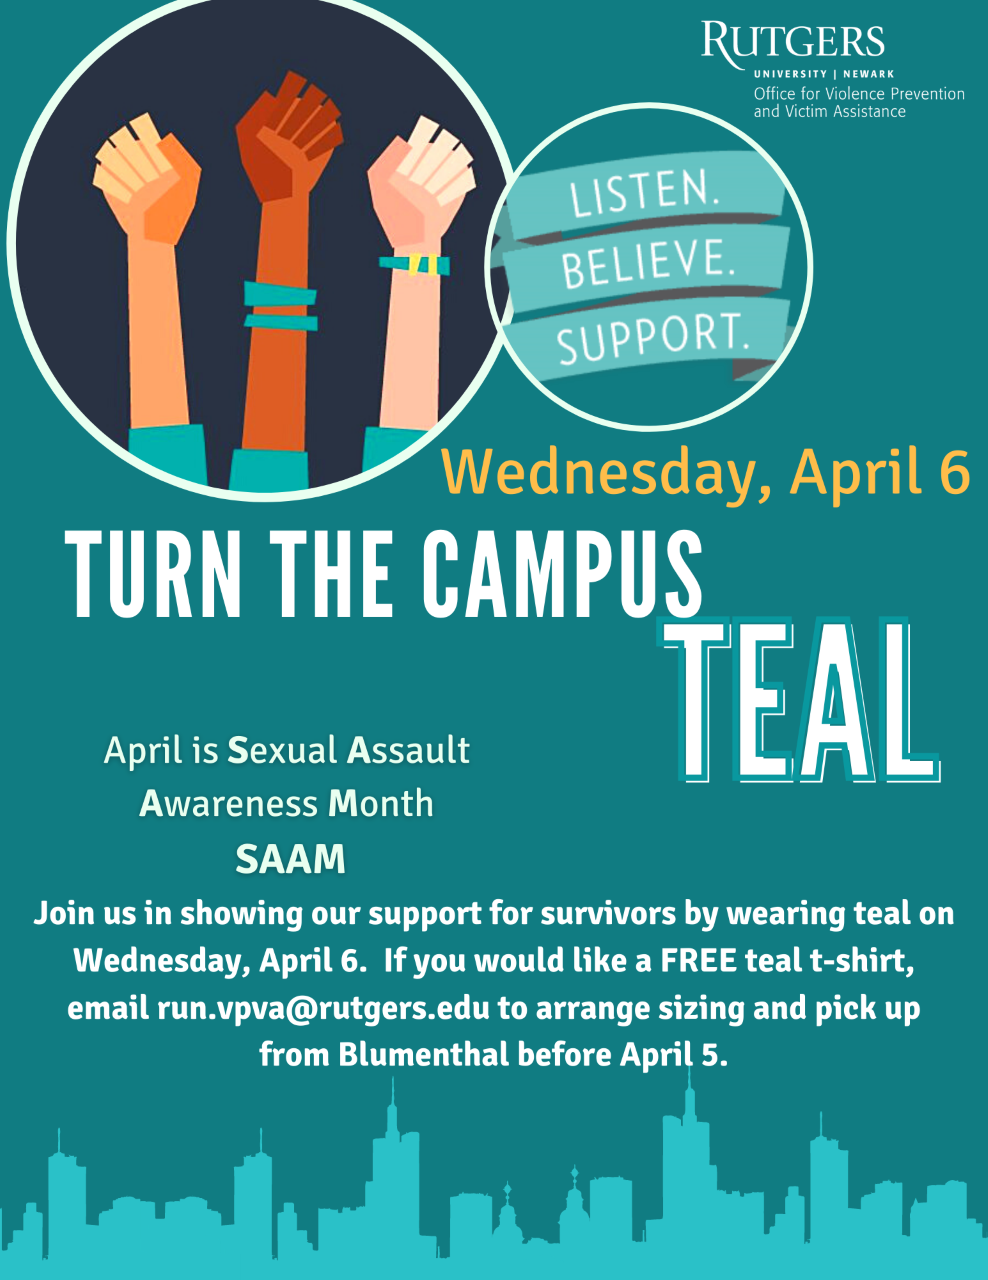 Teal flyer with title "Turn the Campus Teal" in foreground. A silhouette of a cityscape in the background. In two circles at the top, multicultural fists are raised displaying teal wrist bands next to a set of banners reading "Listen. Believe. Support."